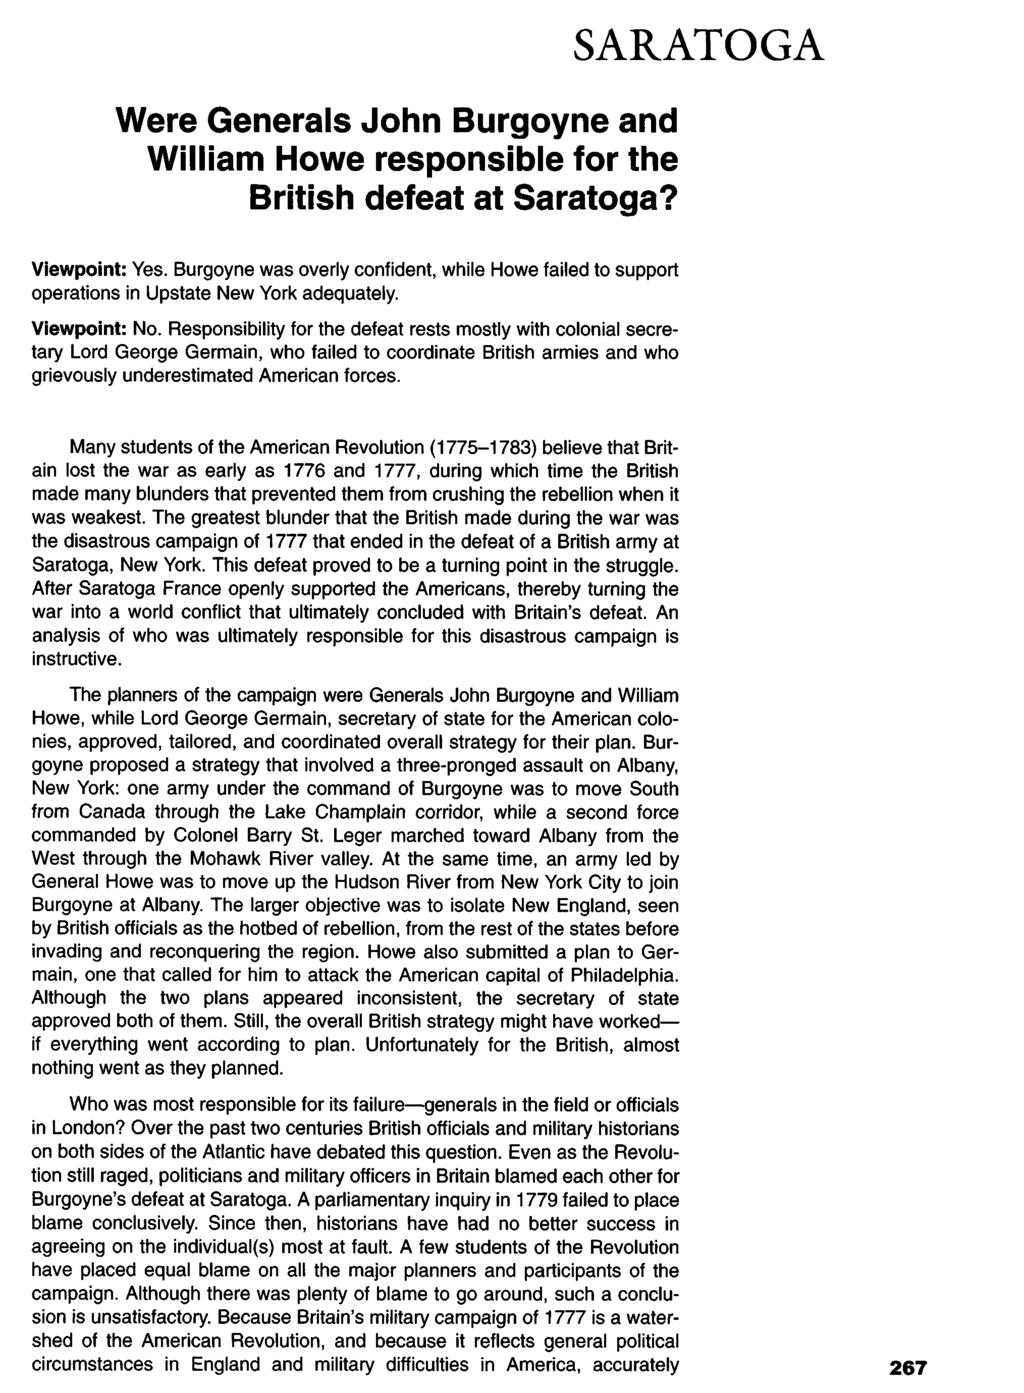 Were Generals John Burgoyne and William Howe responsible for the British defeat at Saratoga? SARATOGA Viewpoint: Yes.